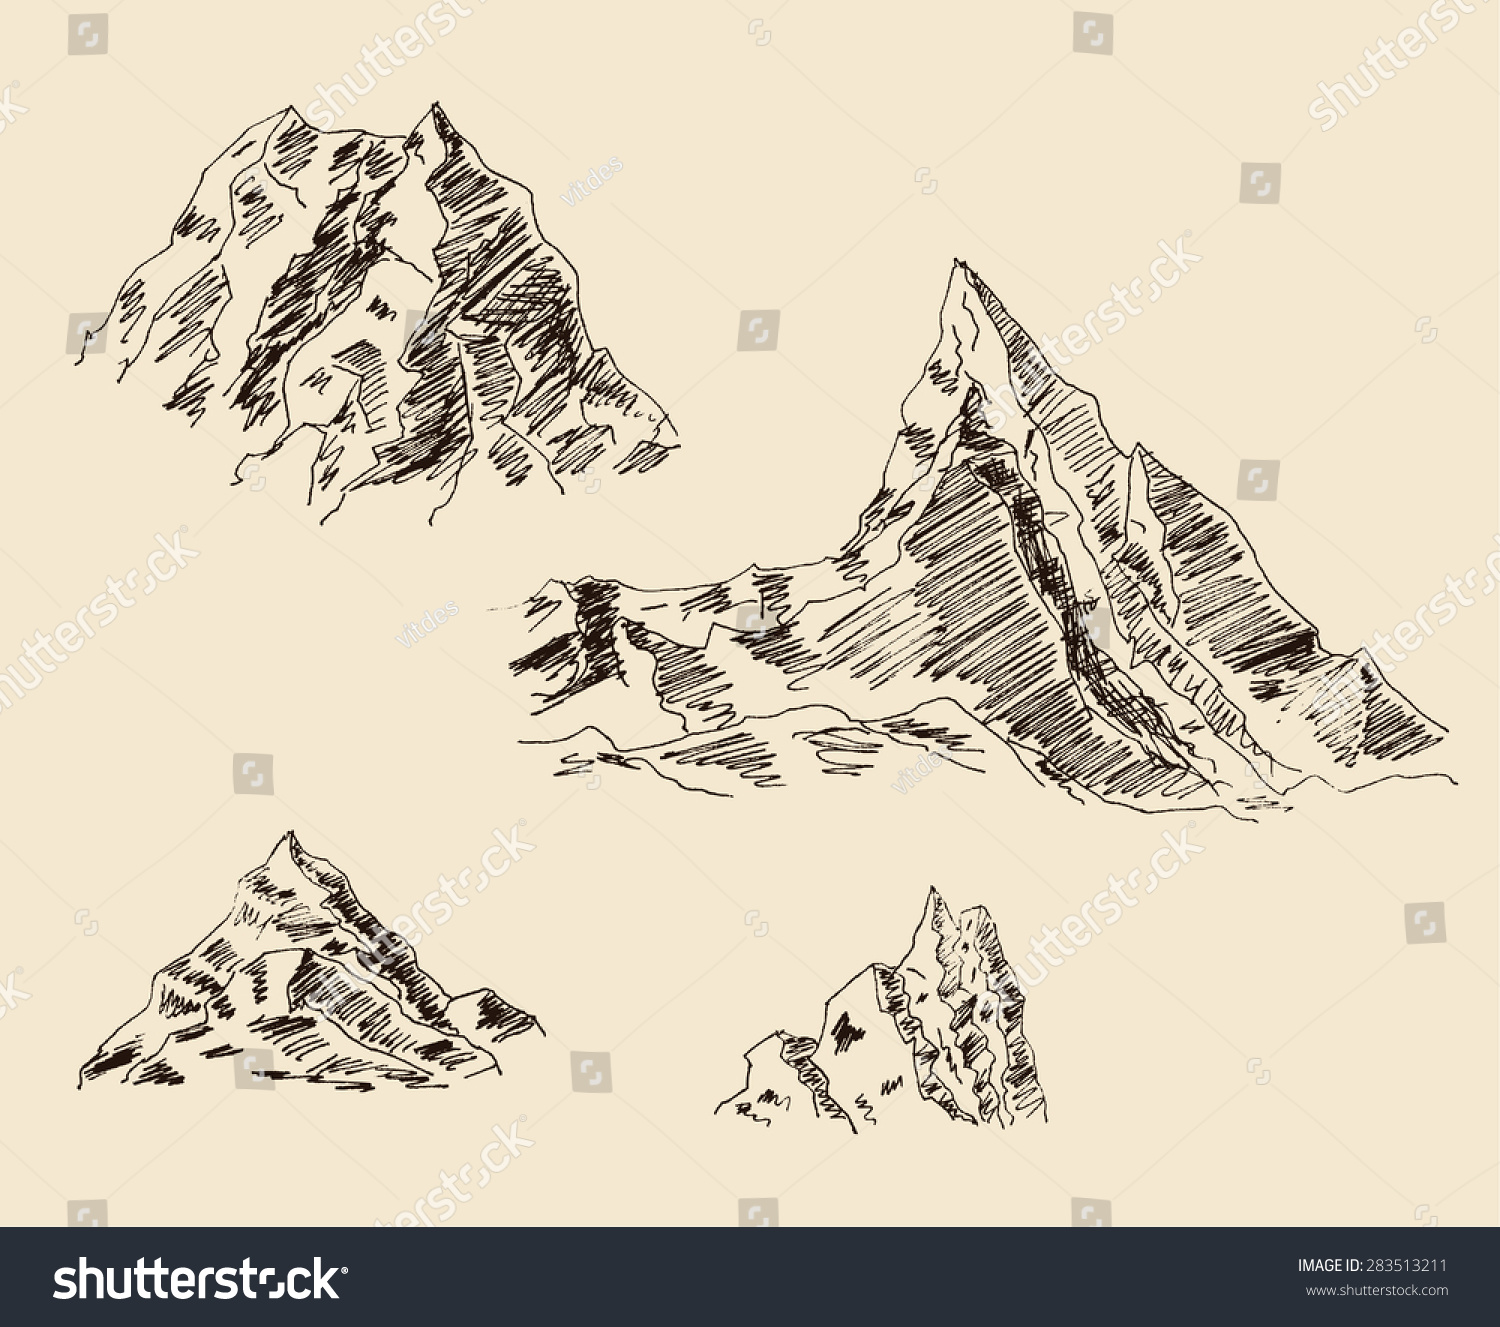 Rocky Mountain Scenery Sketch Hand Drawing Stock Vector 283513211 ...